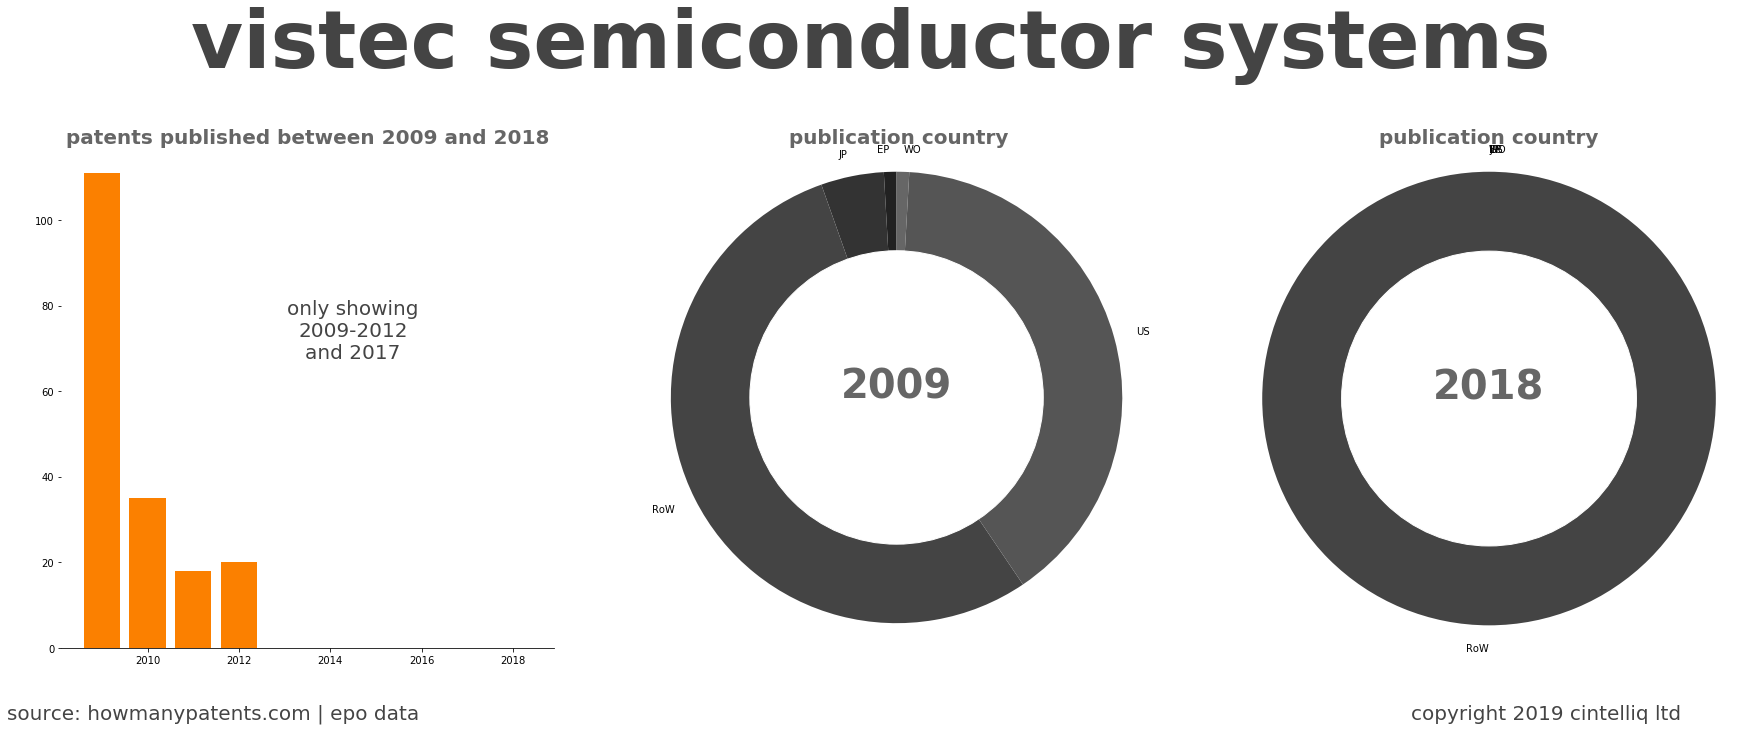 summary of patents for Vistec Semiconductor Systems